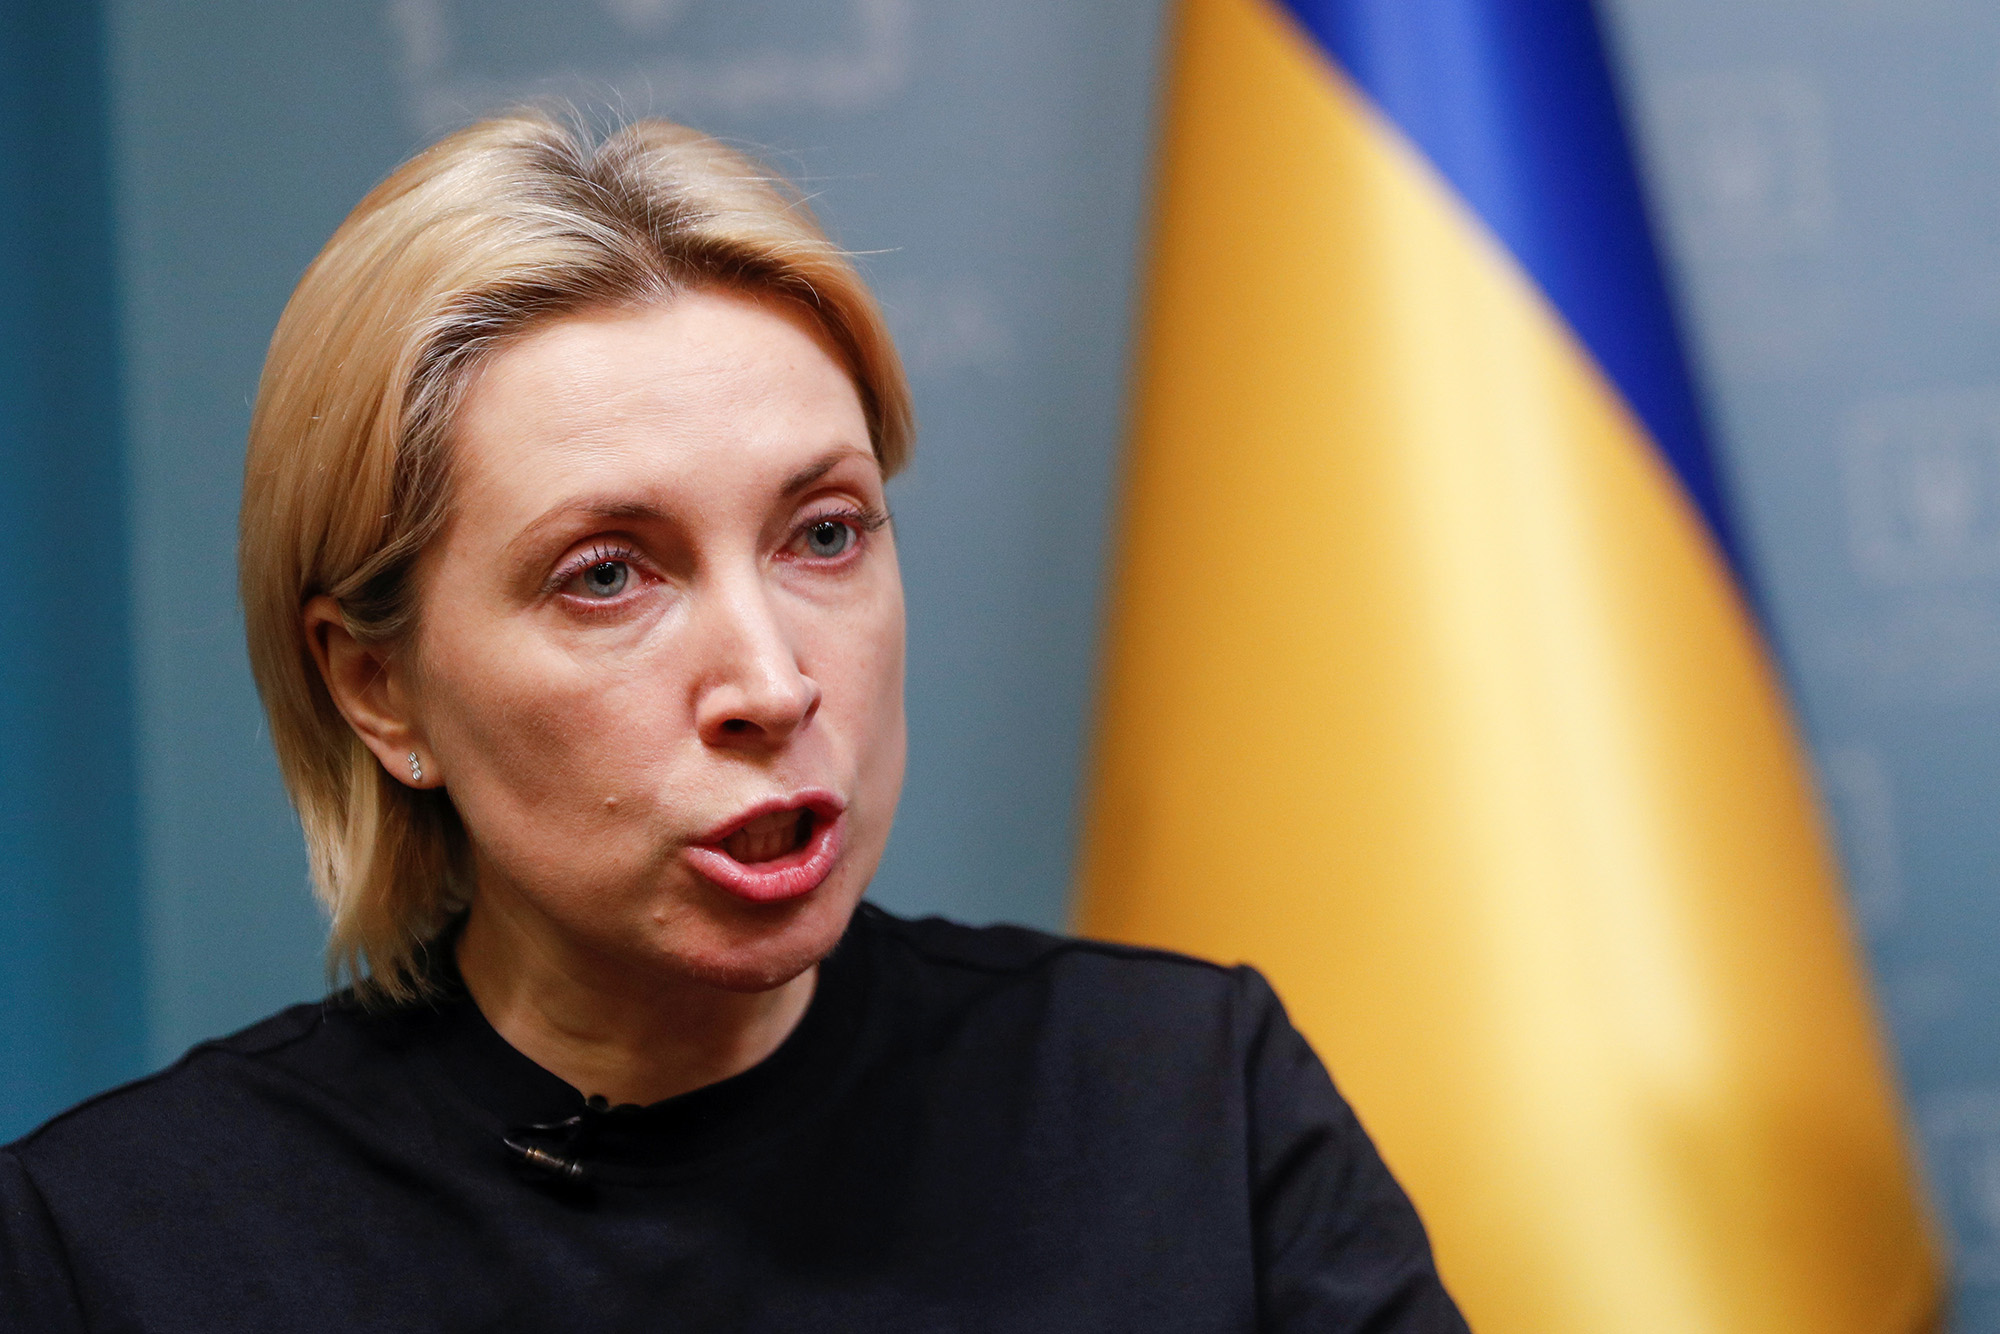 Ukraine's Deputy Prime Minister Iryna Vereshchuk, in charge of negotiating prisoner swaps and humanitarian corridors with Russia, speaks during an interview with Reuters in Kyiv, Ukraine, on April 11. 